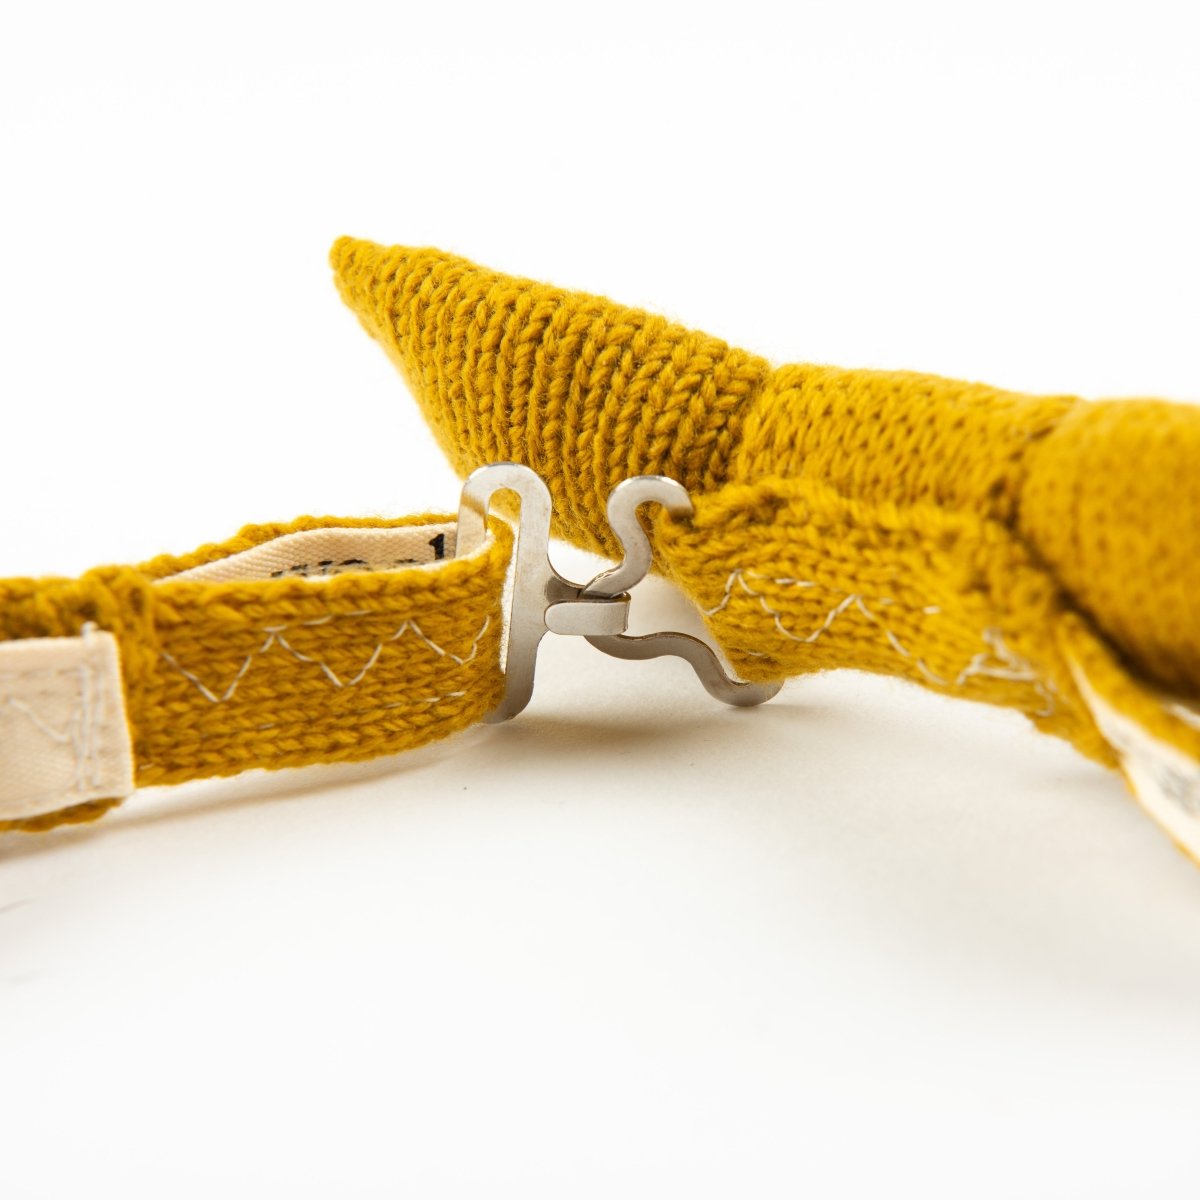 Butterscotch Yellow Bow Tie - Wool & Water